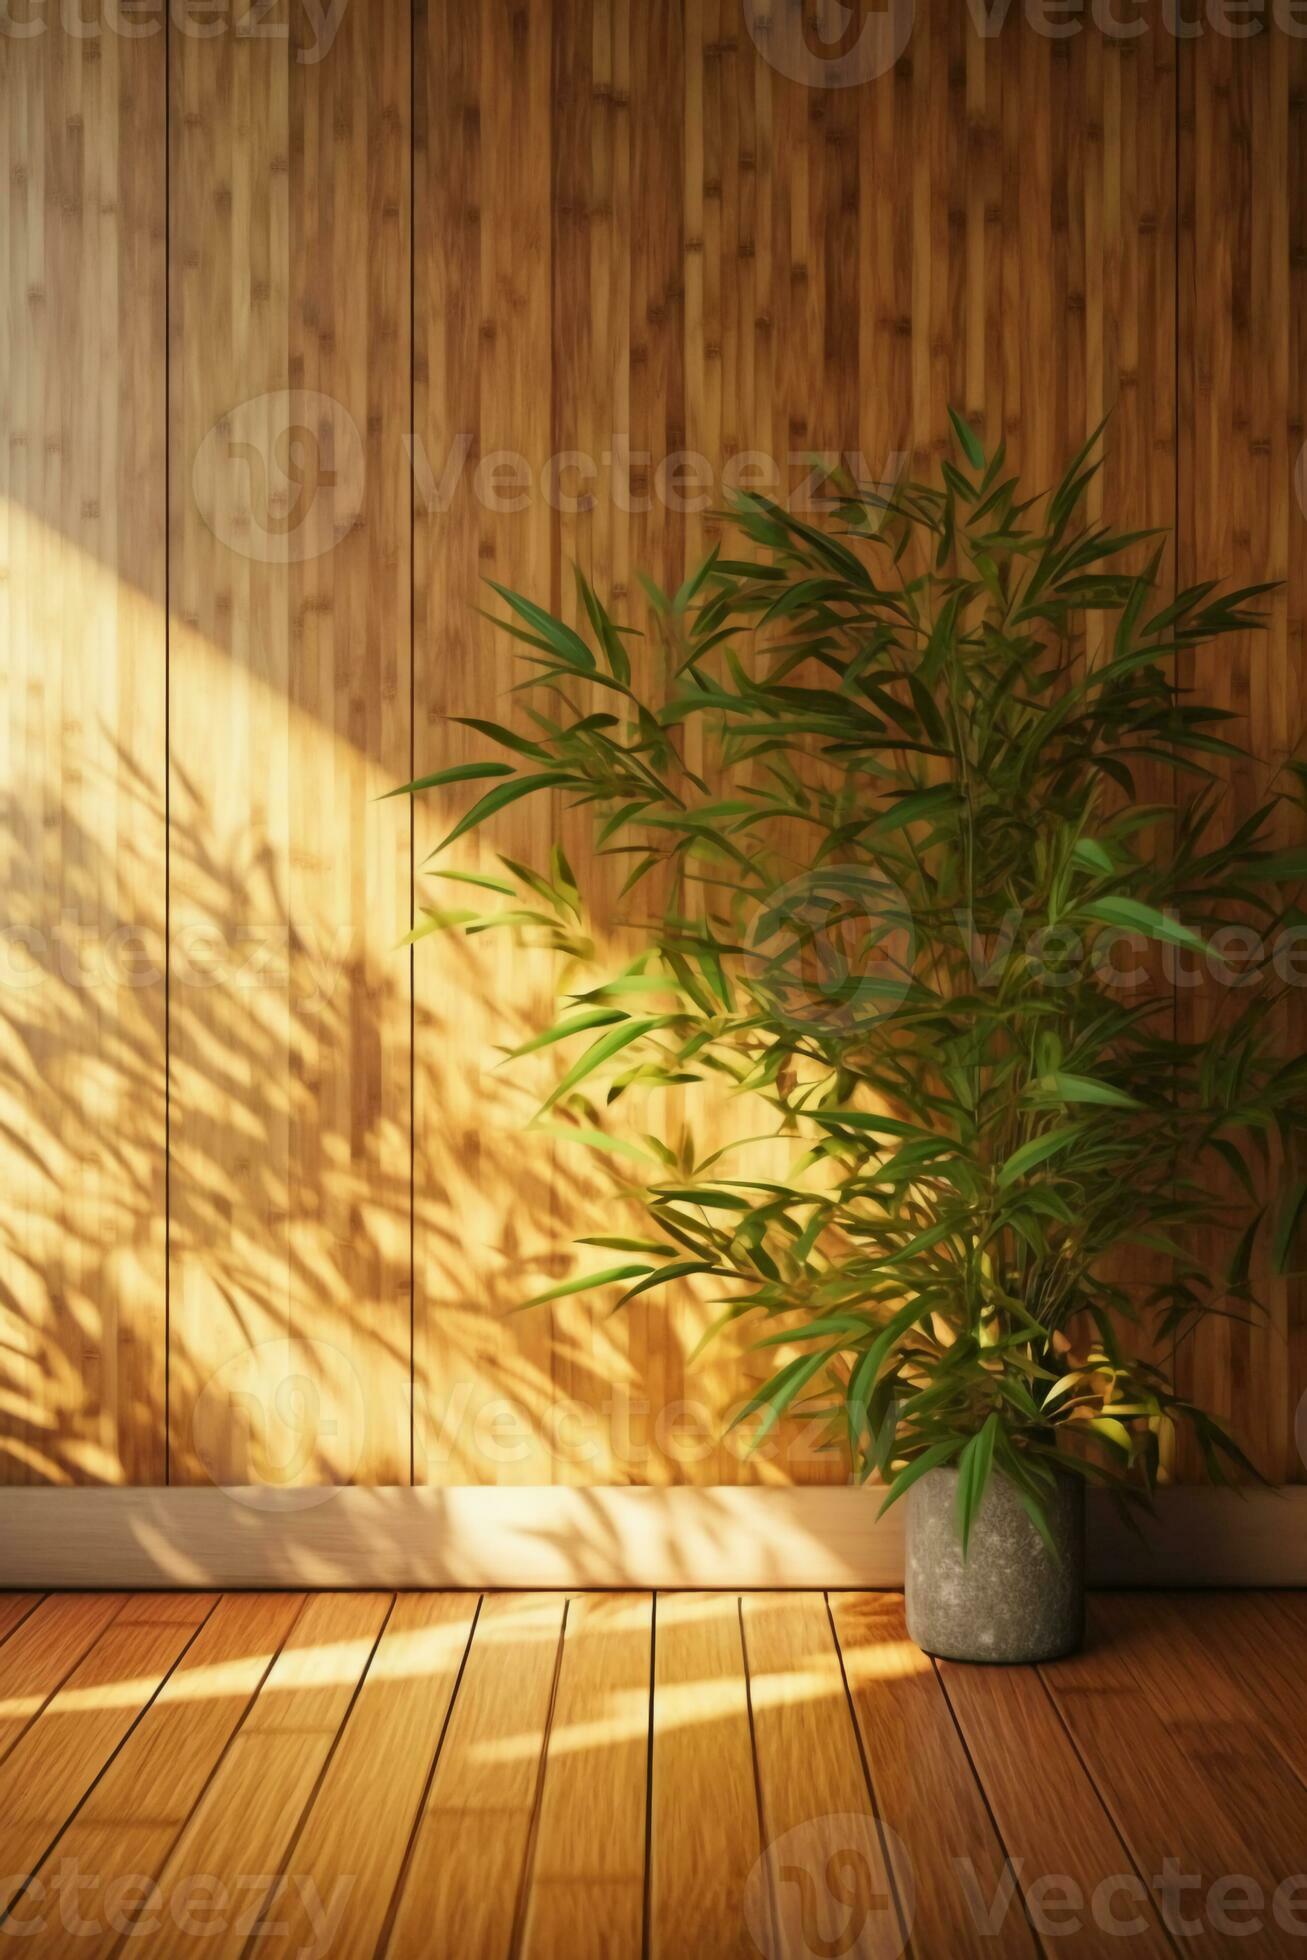 Bamboo wood. Brown wooden texture..Nature bamboo board for design backdrop  wallpaper tiled floor. Background. Japanese style. Stock Photo